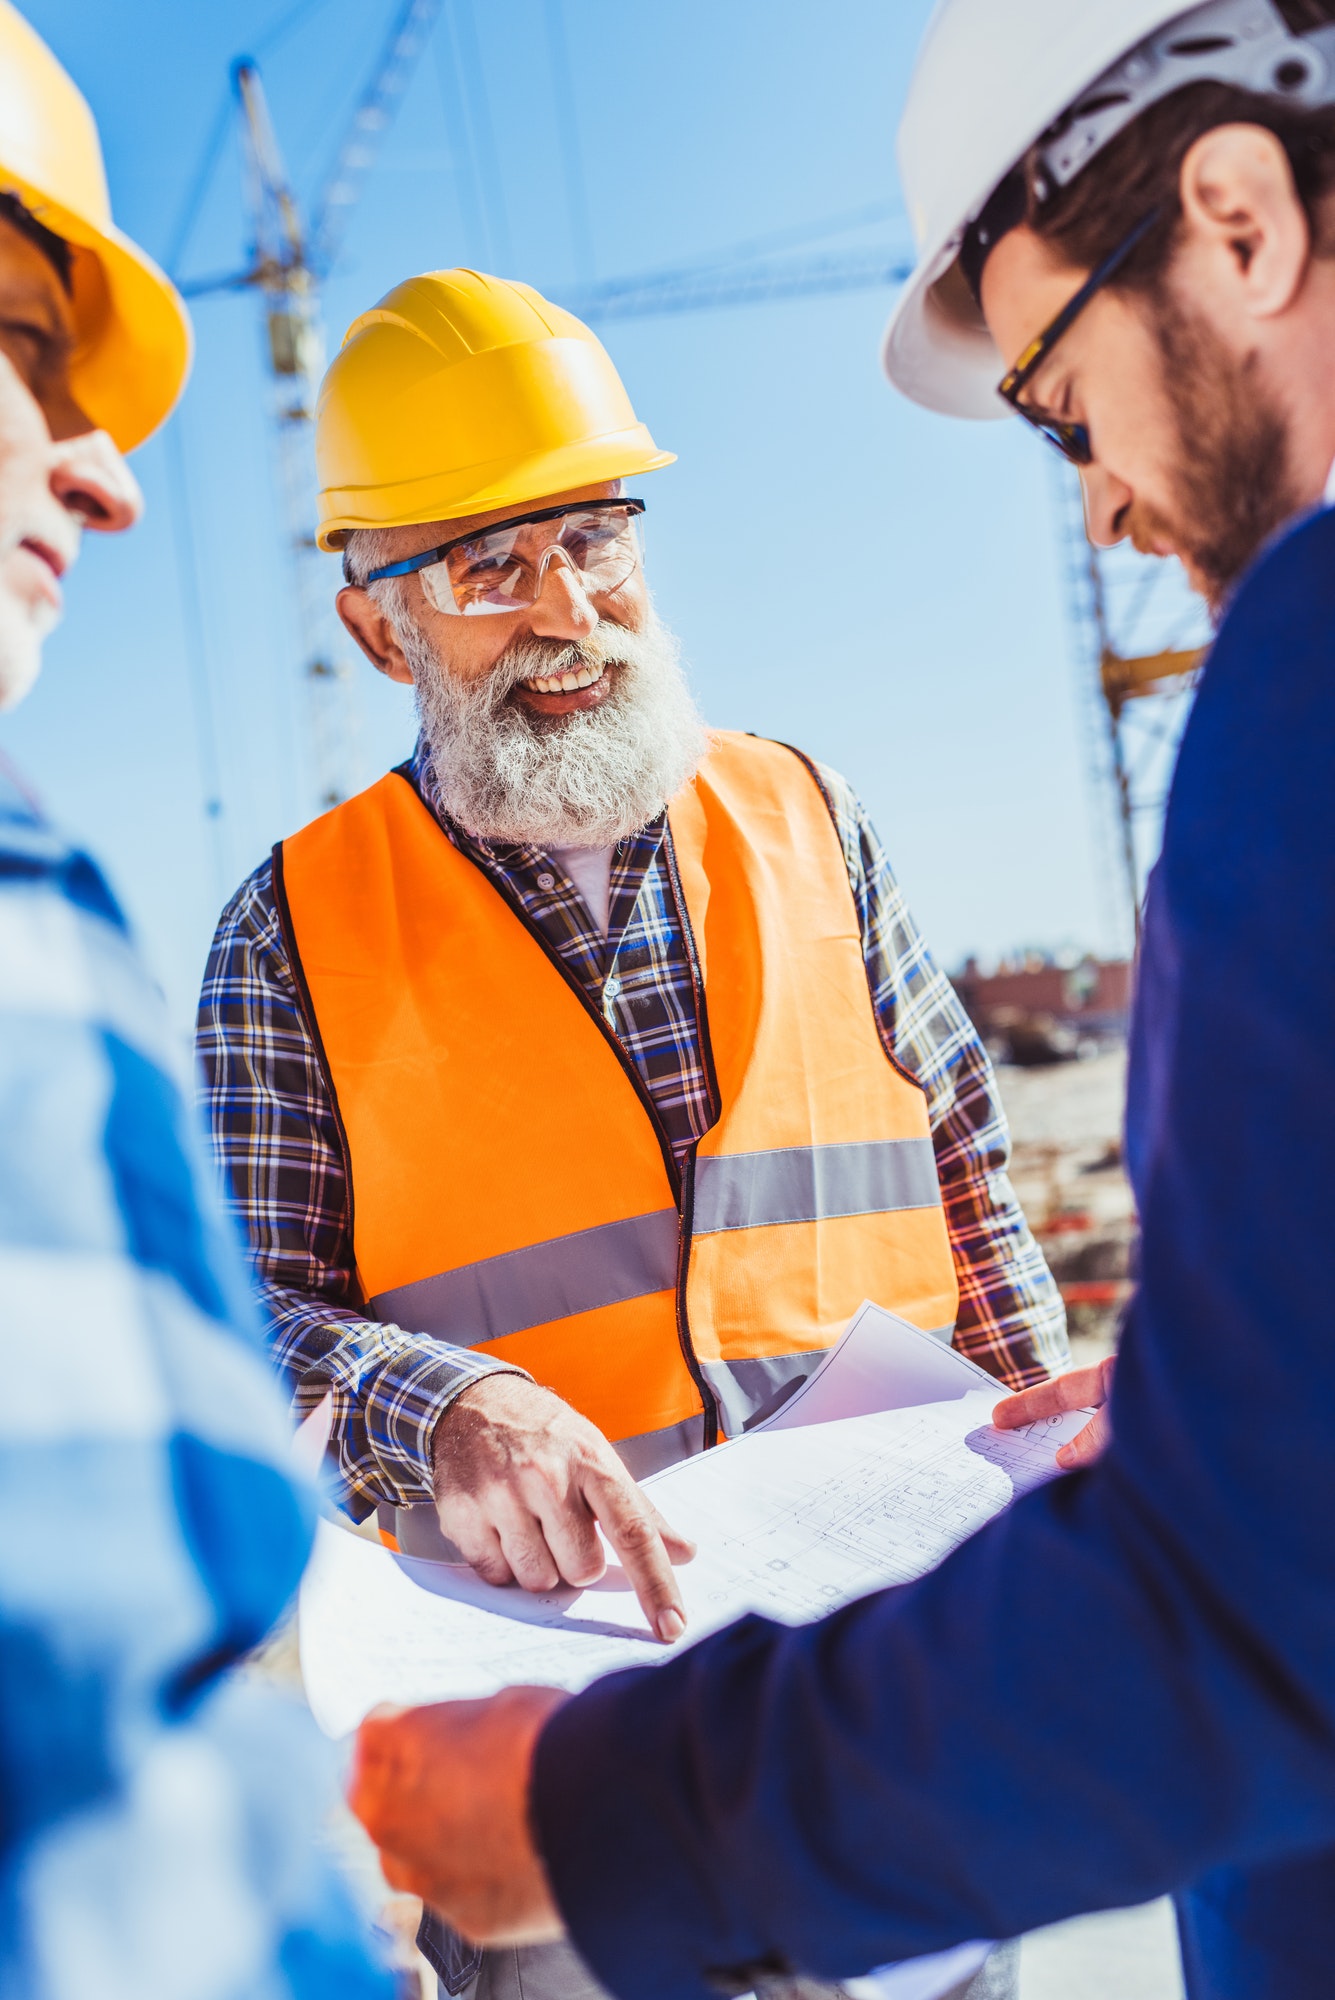 Construction worker in protective uniform discussing building plans with businessman in hardhat and